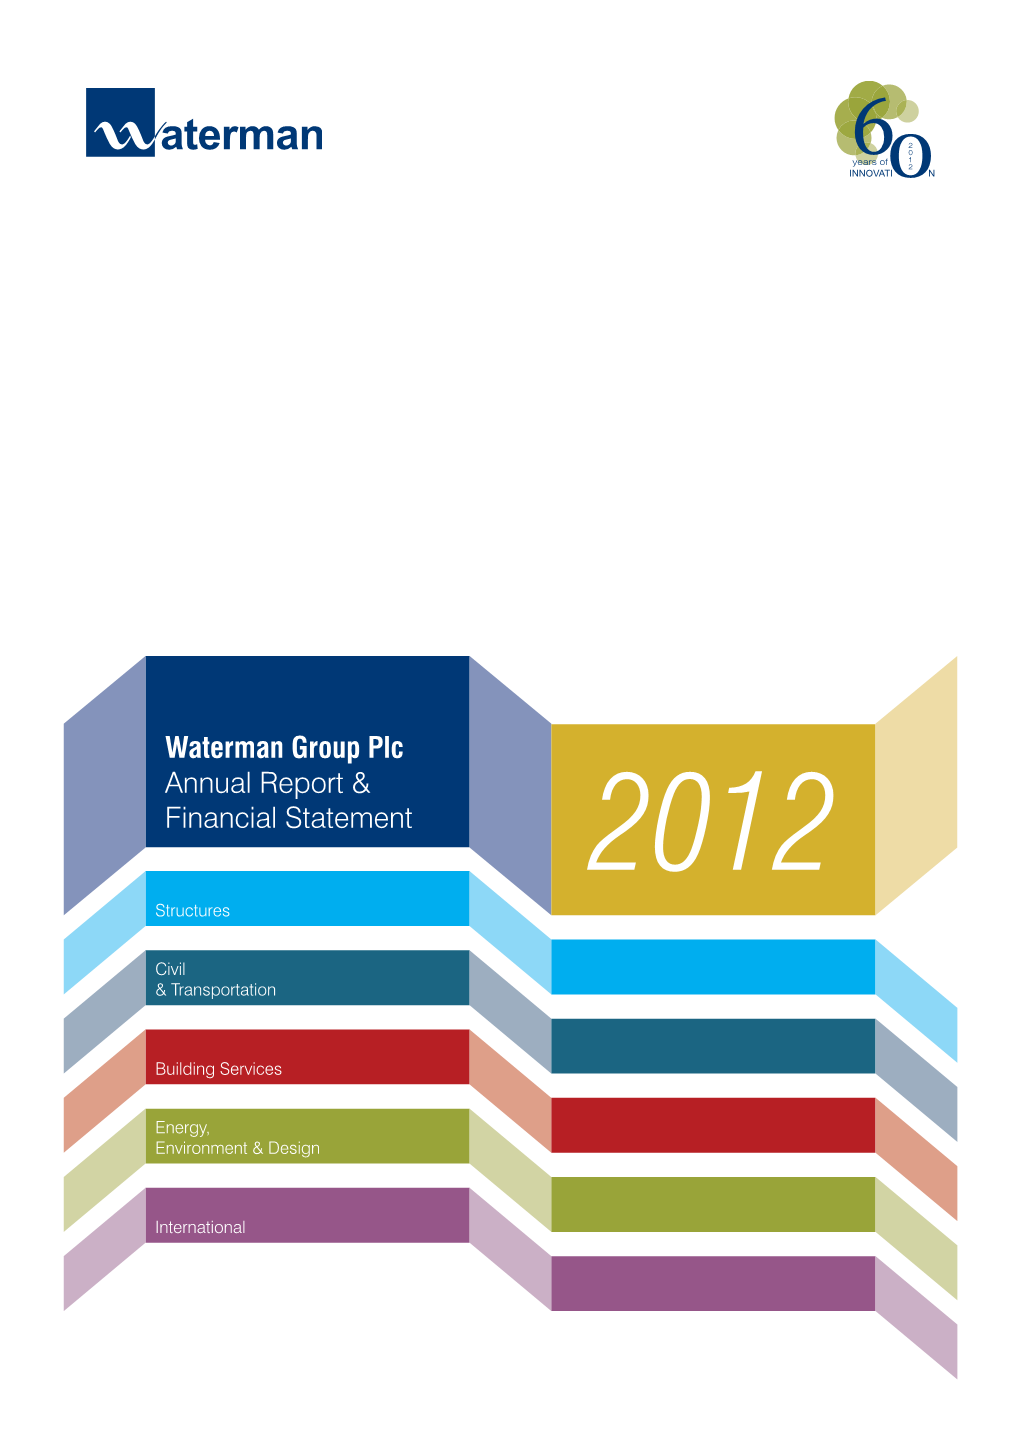 Waterman Group Plc Annual Report & Financial Statement